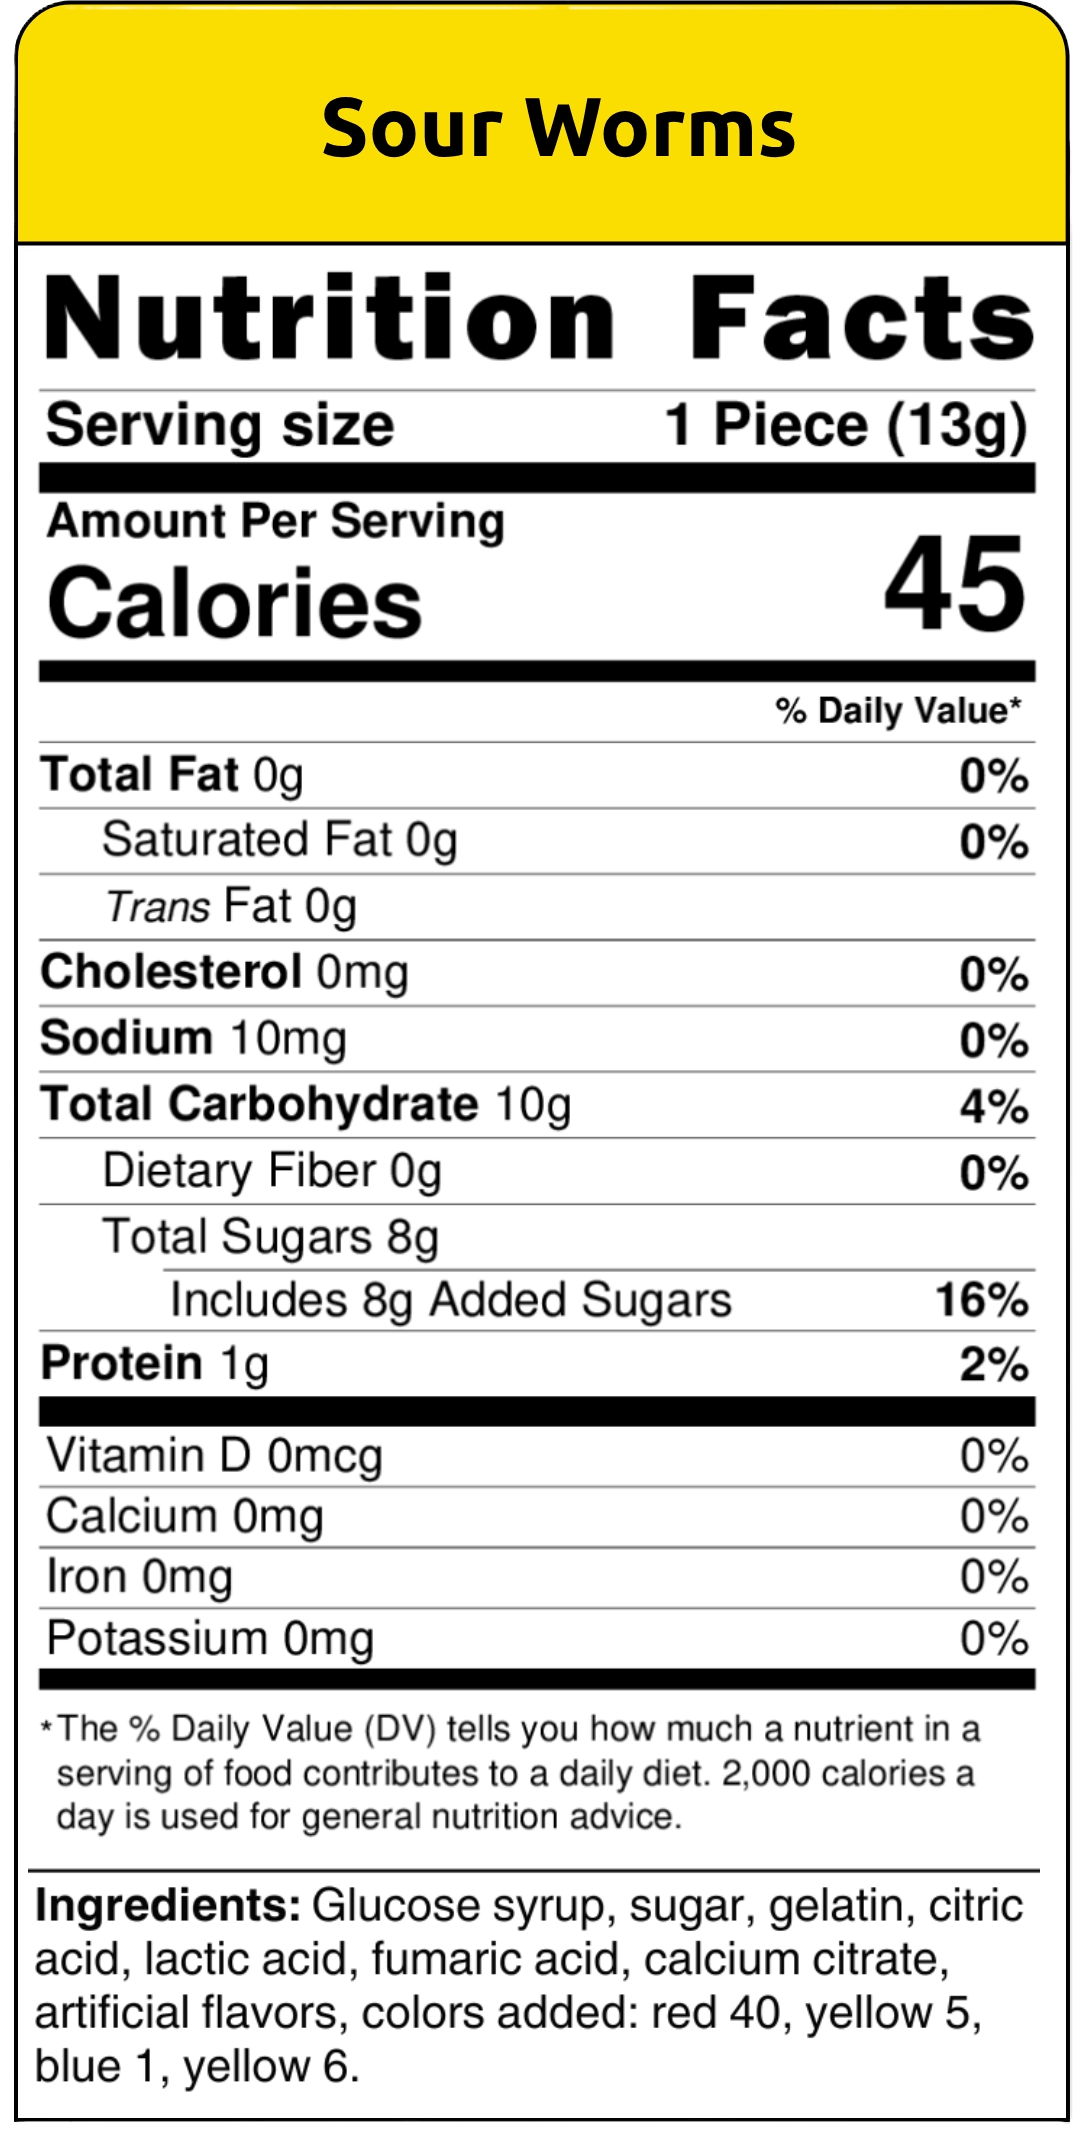 nutritional facts sour worms